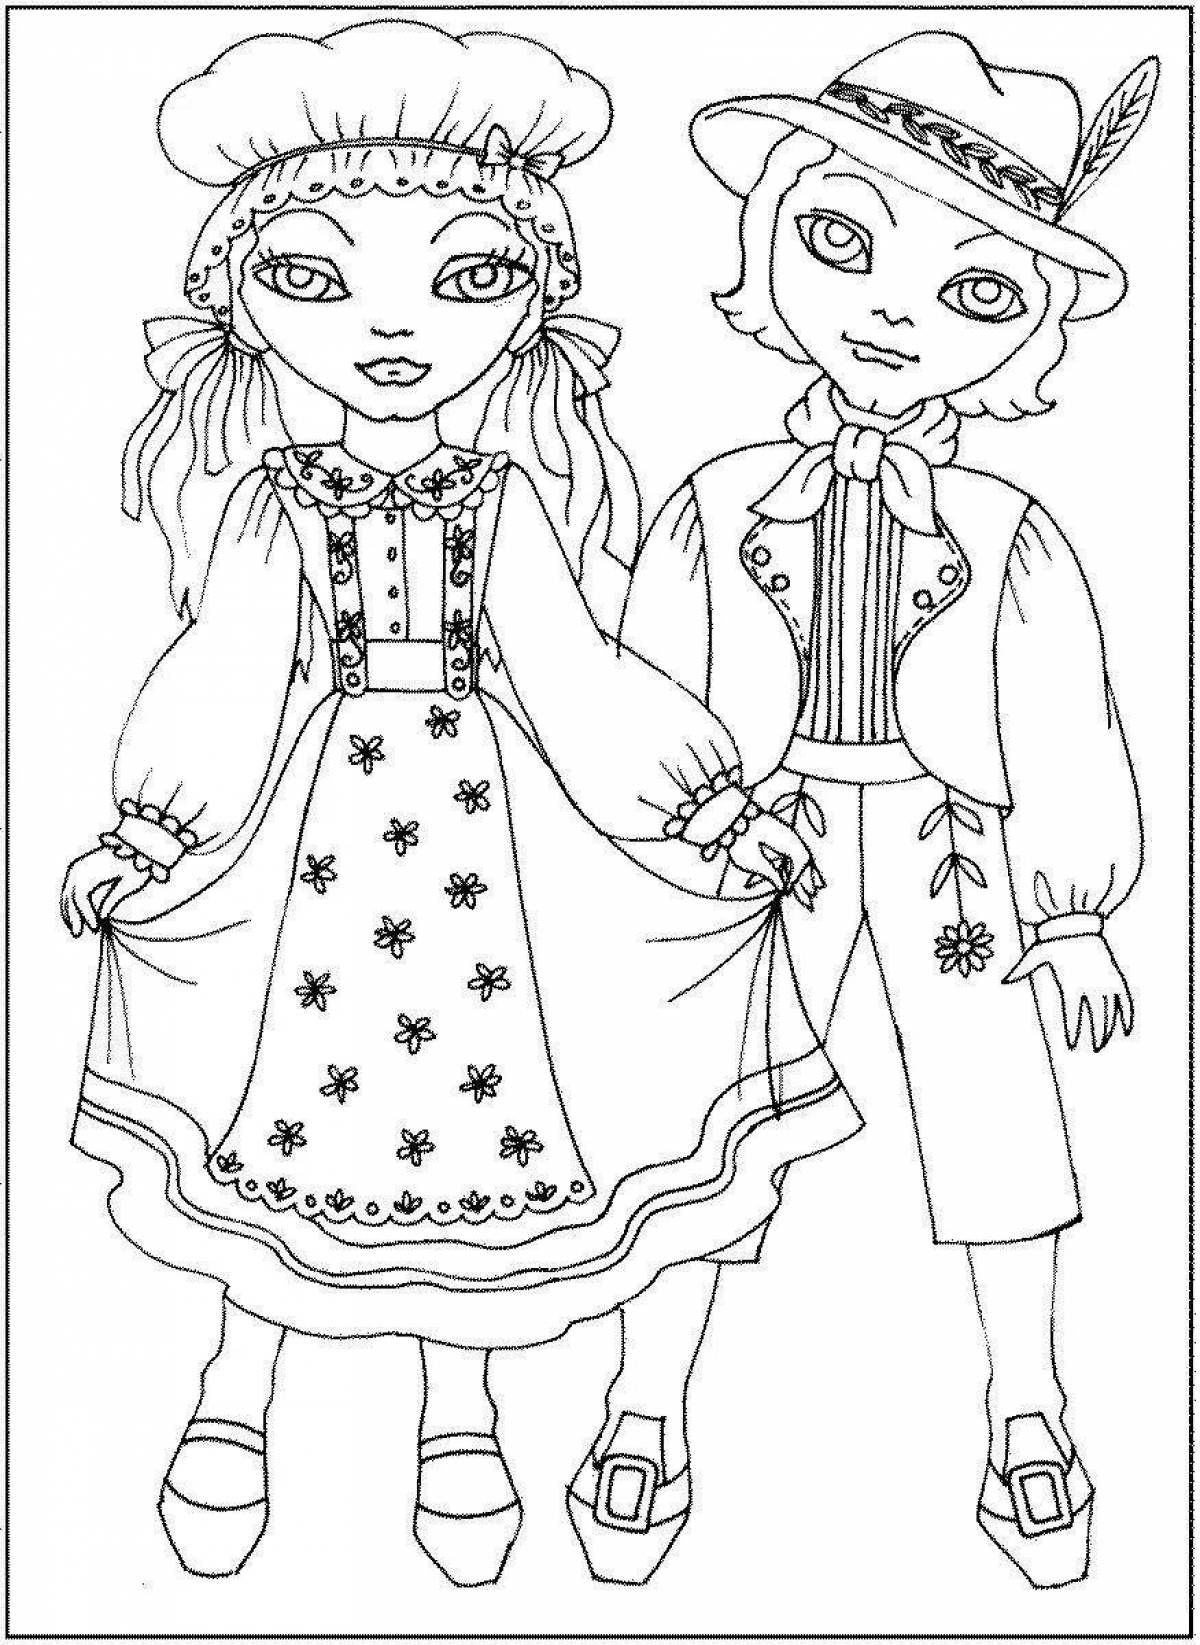 Fascinating Belarusian clothes coloring pages for kids